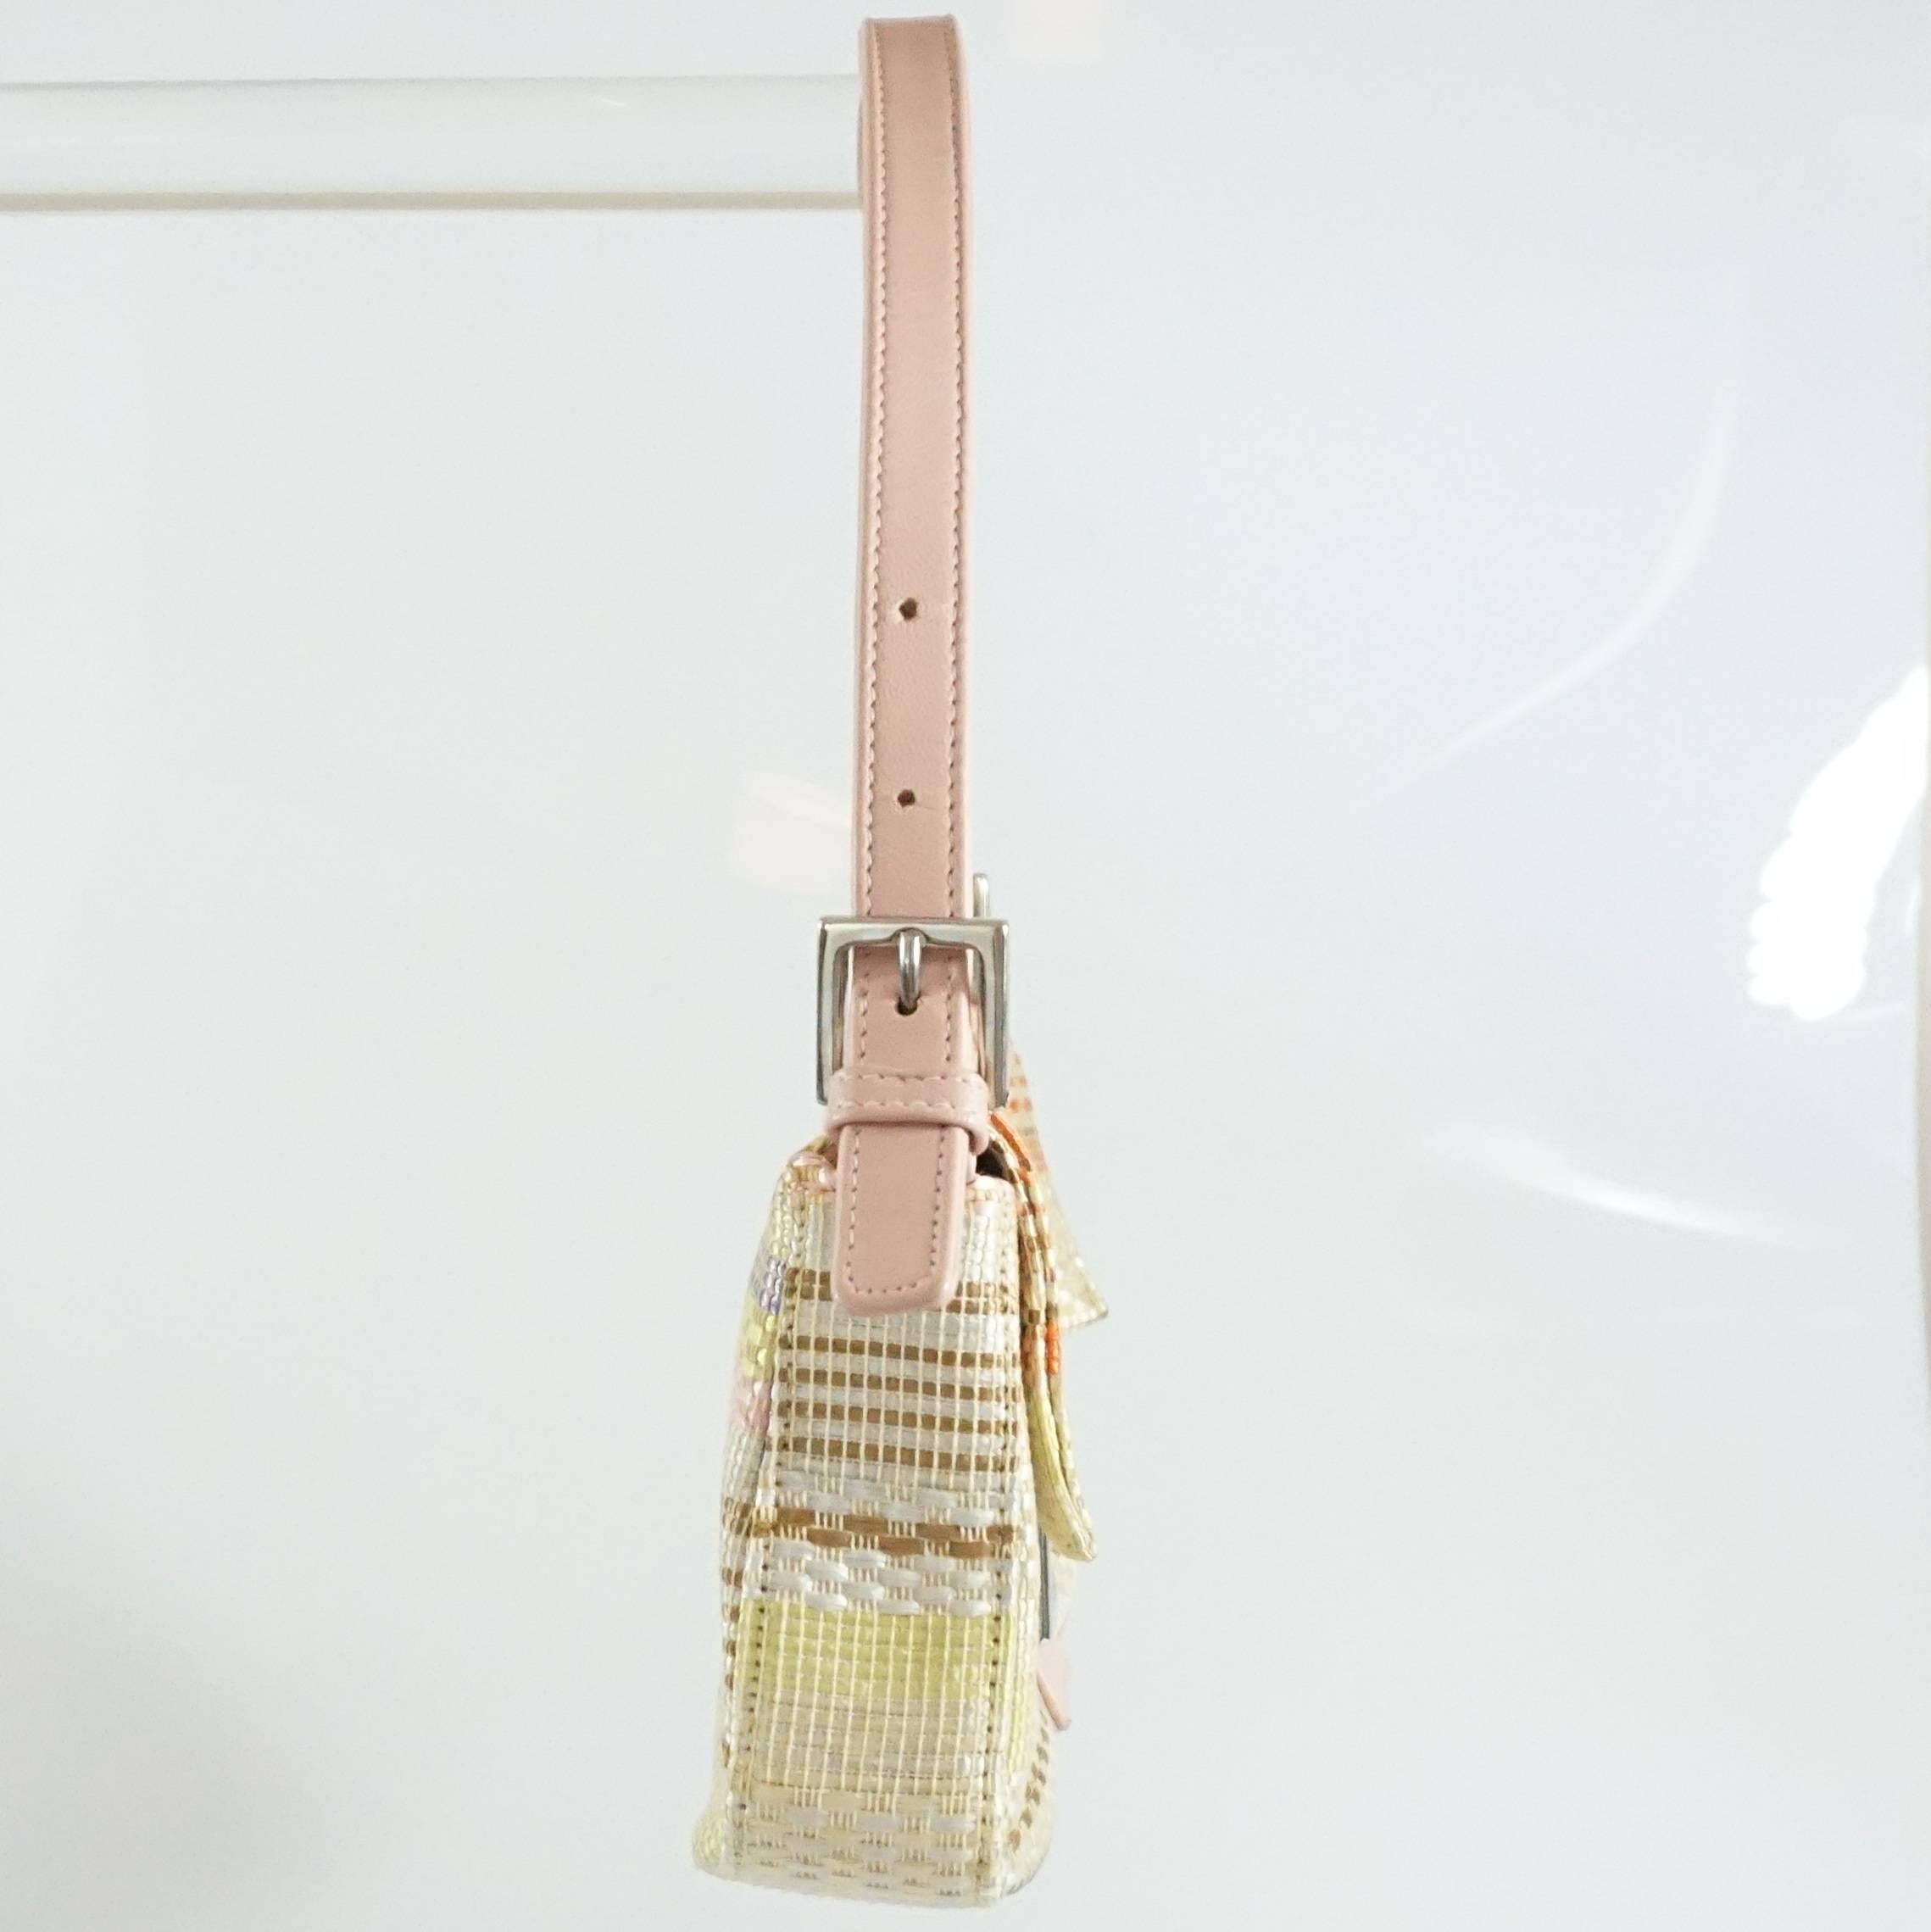 This Fendi handbag is cream with pastel colored stripes. This bag has a woven texture, silver hardware, and a pink handle. This bag is in very good condition with some minor staining on the front buckle leather and inside of the